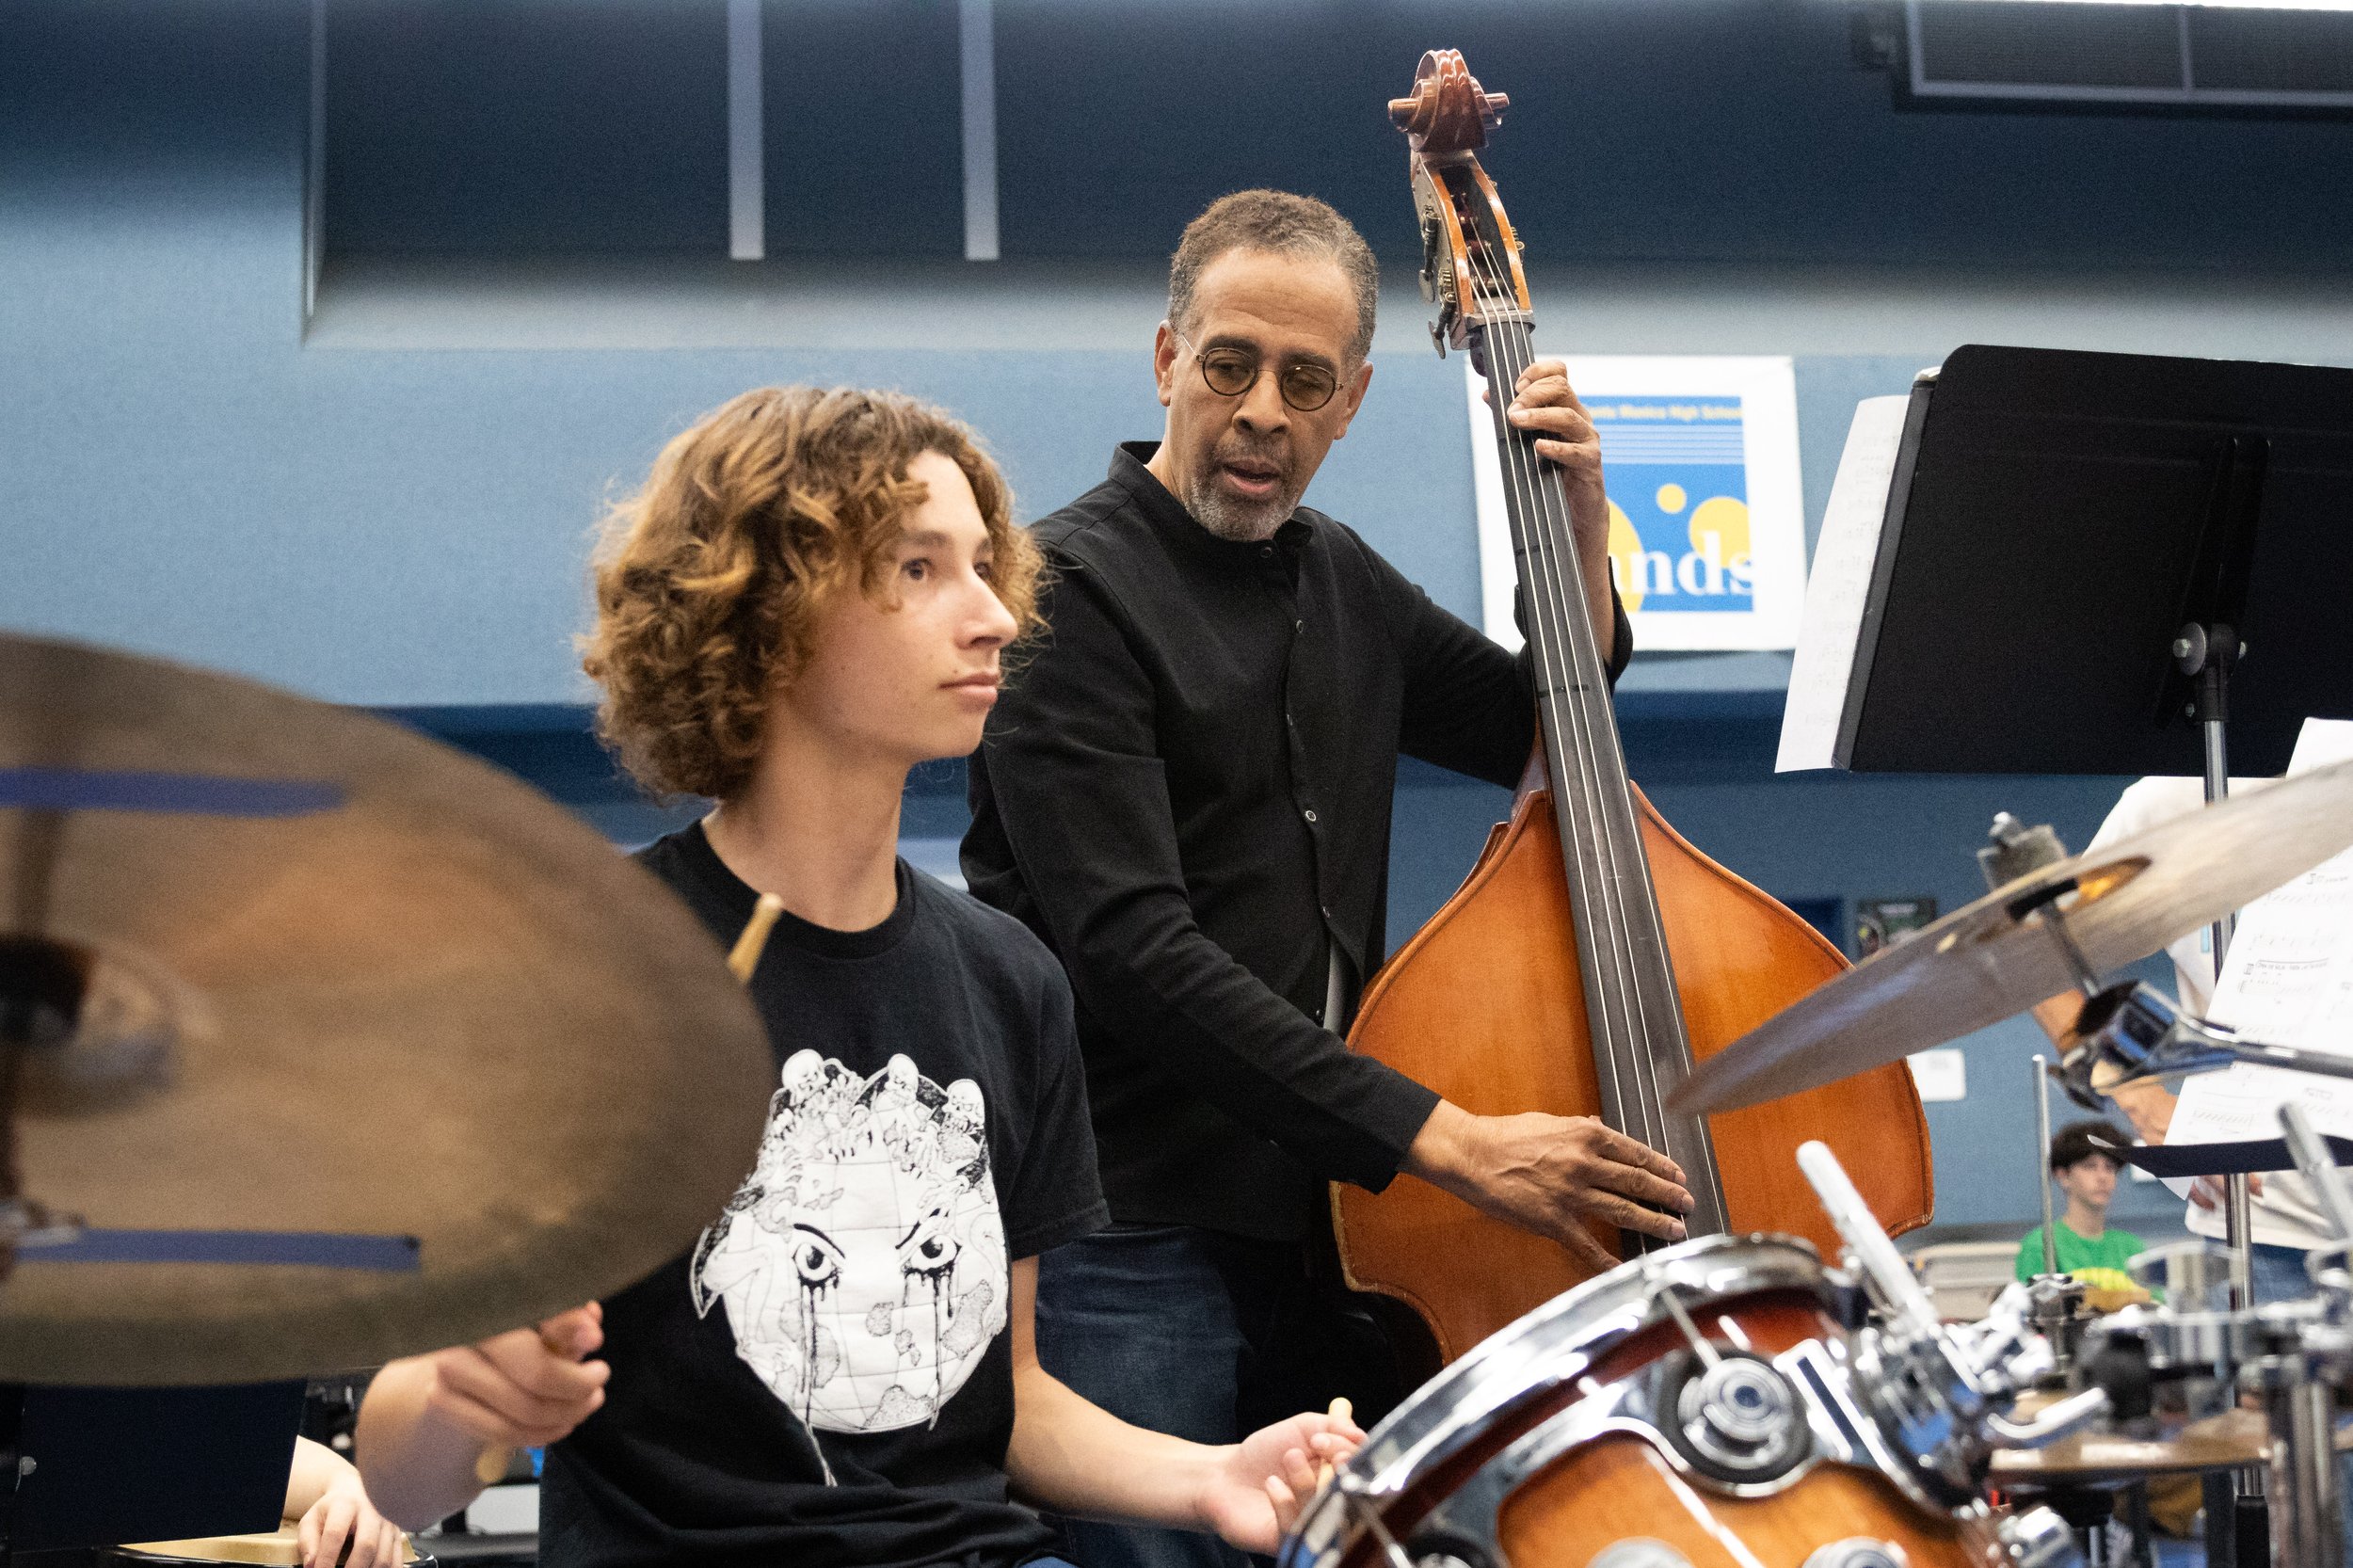  BroadStage artist in resident Stanley Clarke (right) helping students in the jazz band at Santa Monica High School learn “Spain” by Chick Corea in Santa Monica, Calif., on Monday, Sept. 18, 2023. Clarke played bass for the album the song is on, and 